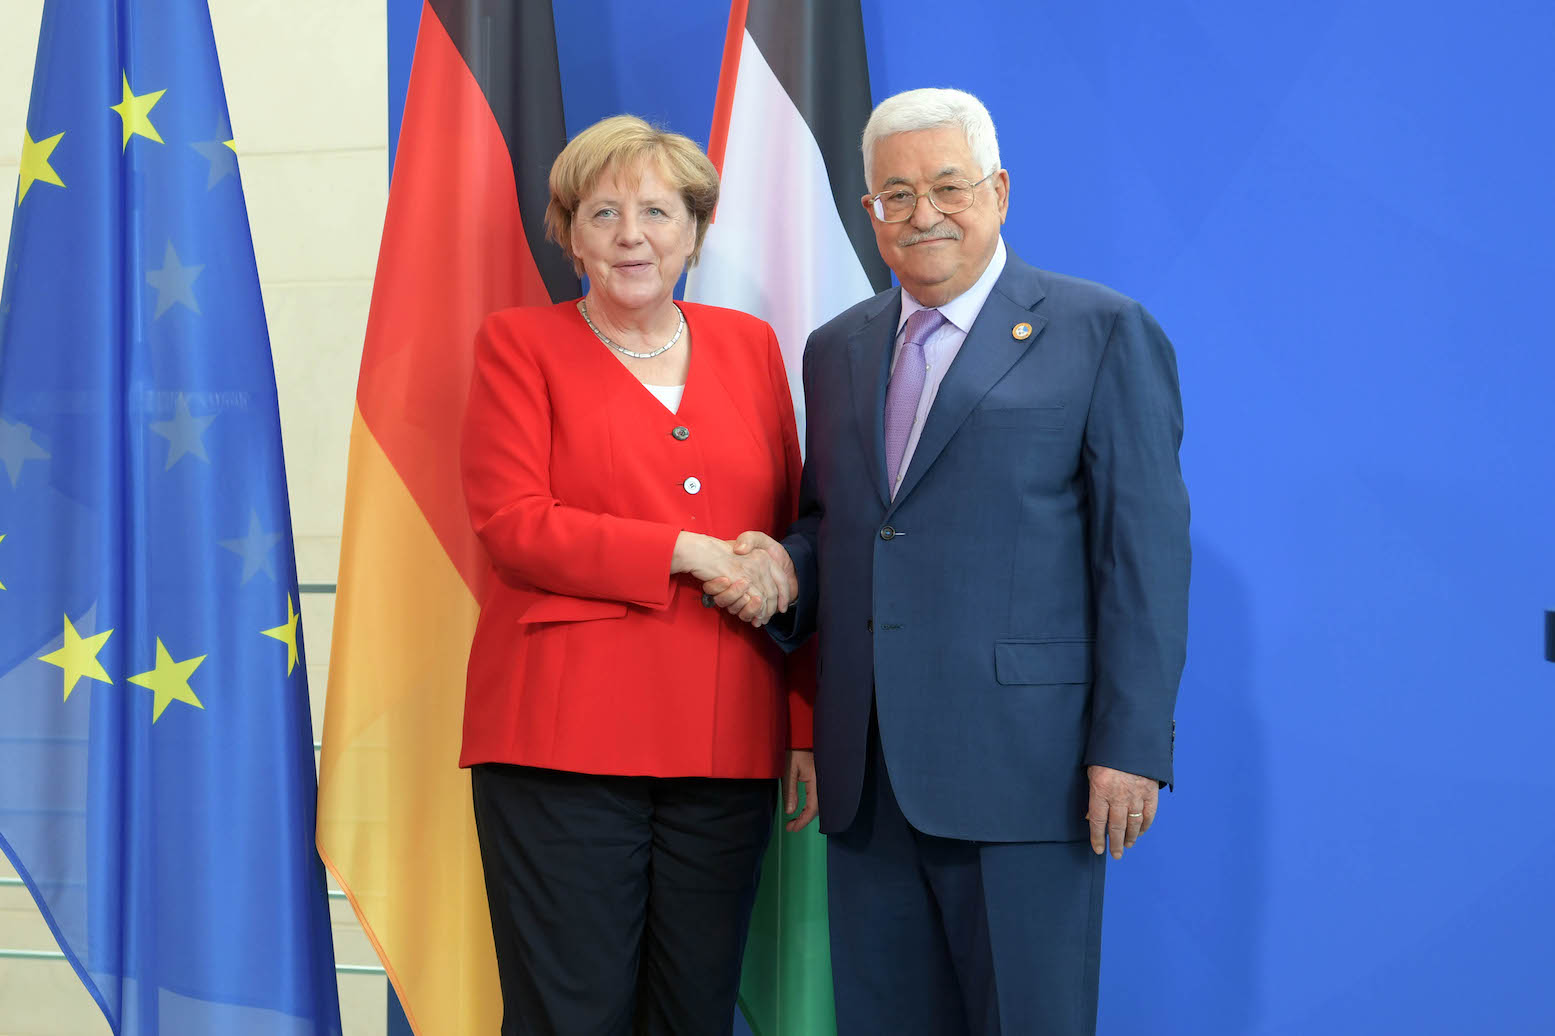 President Abbas meets Chancellor Merkel, during an official visit to Germany